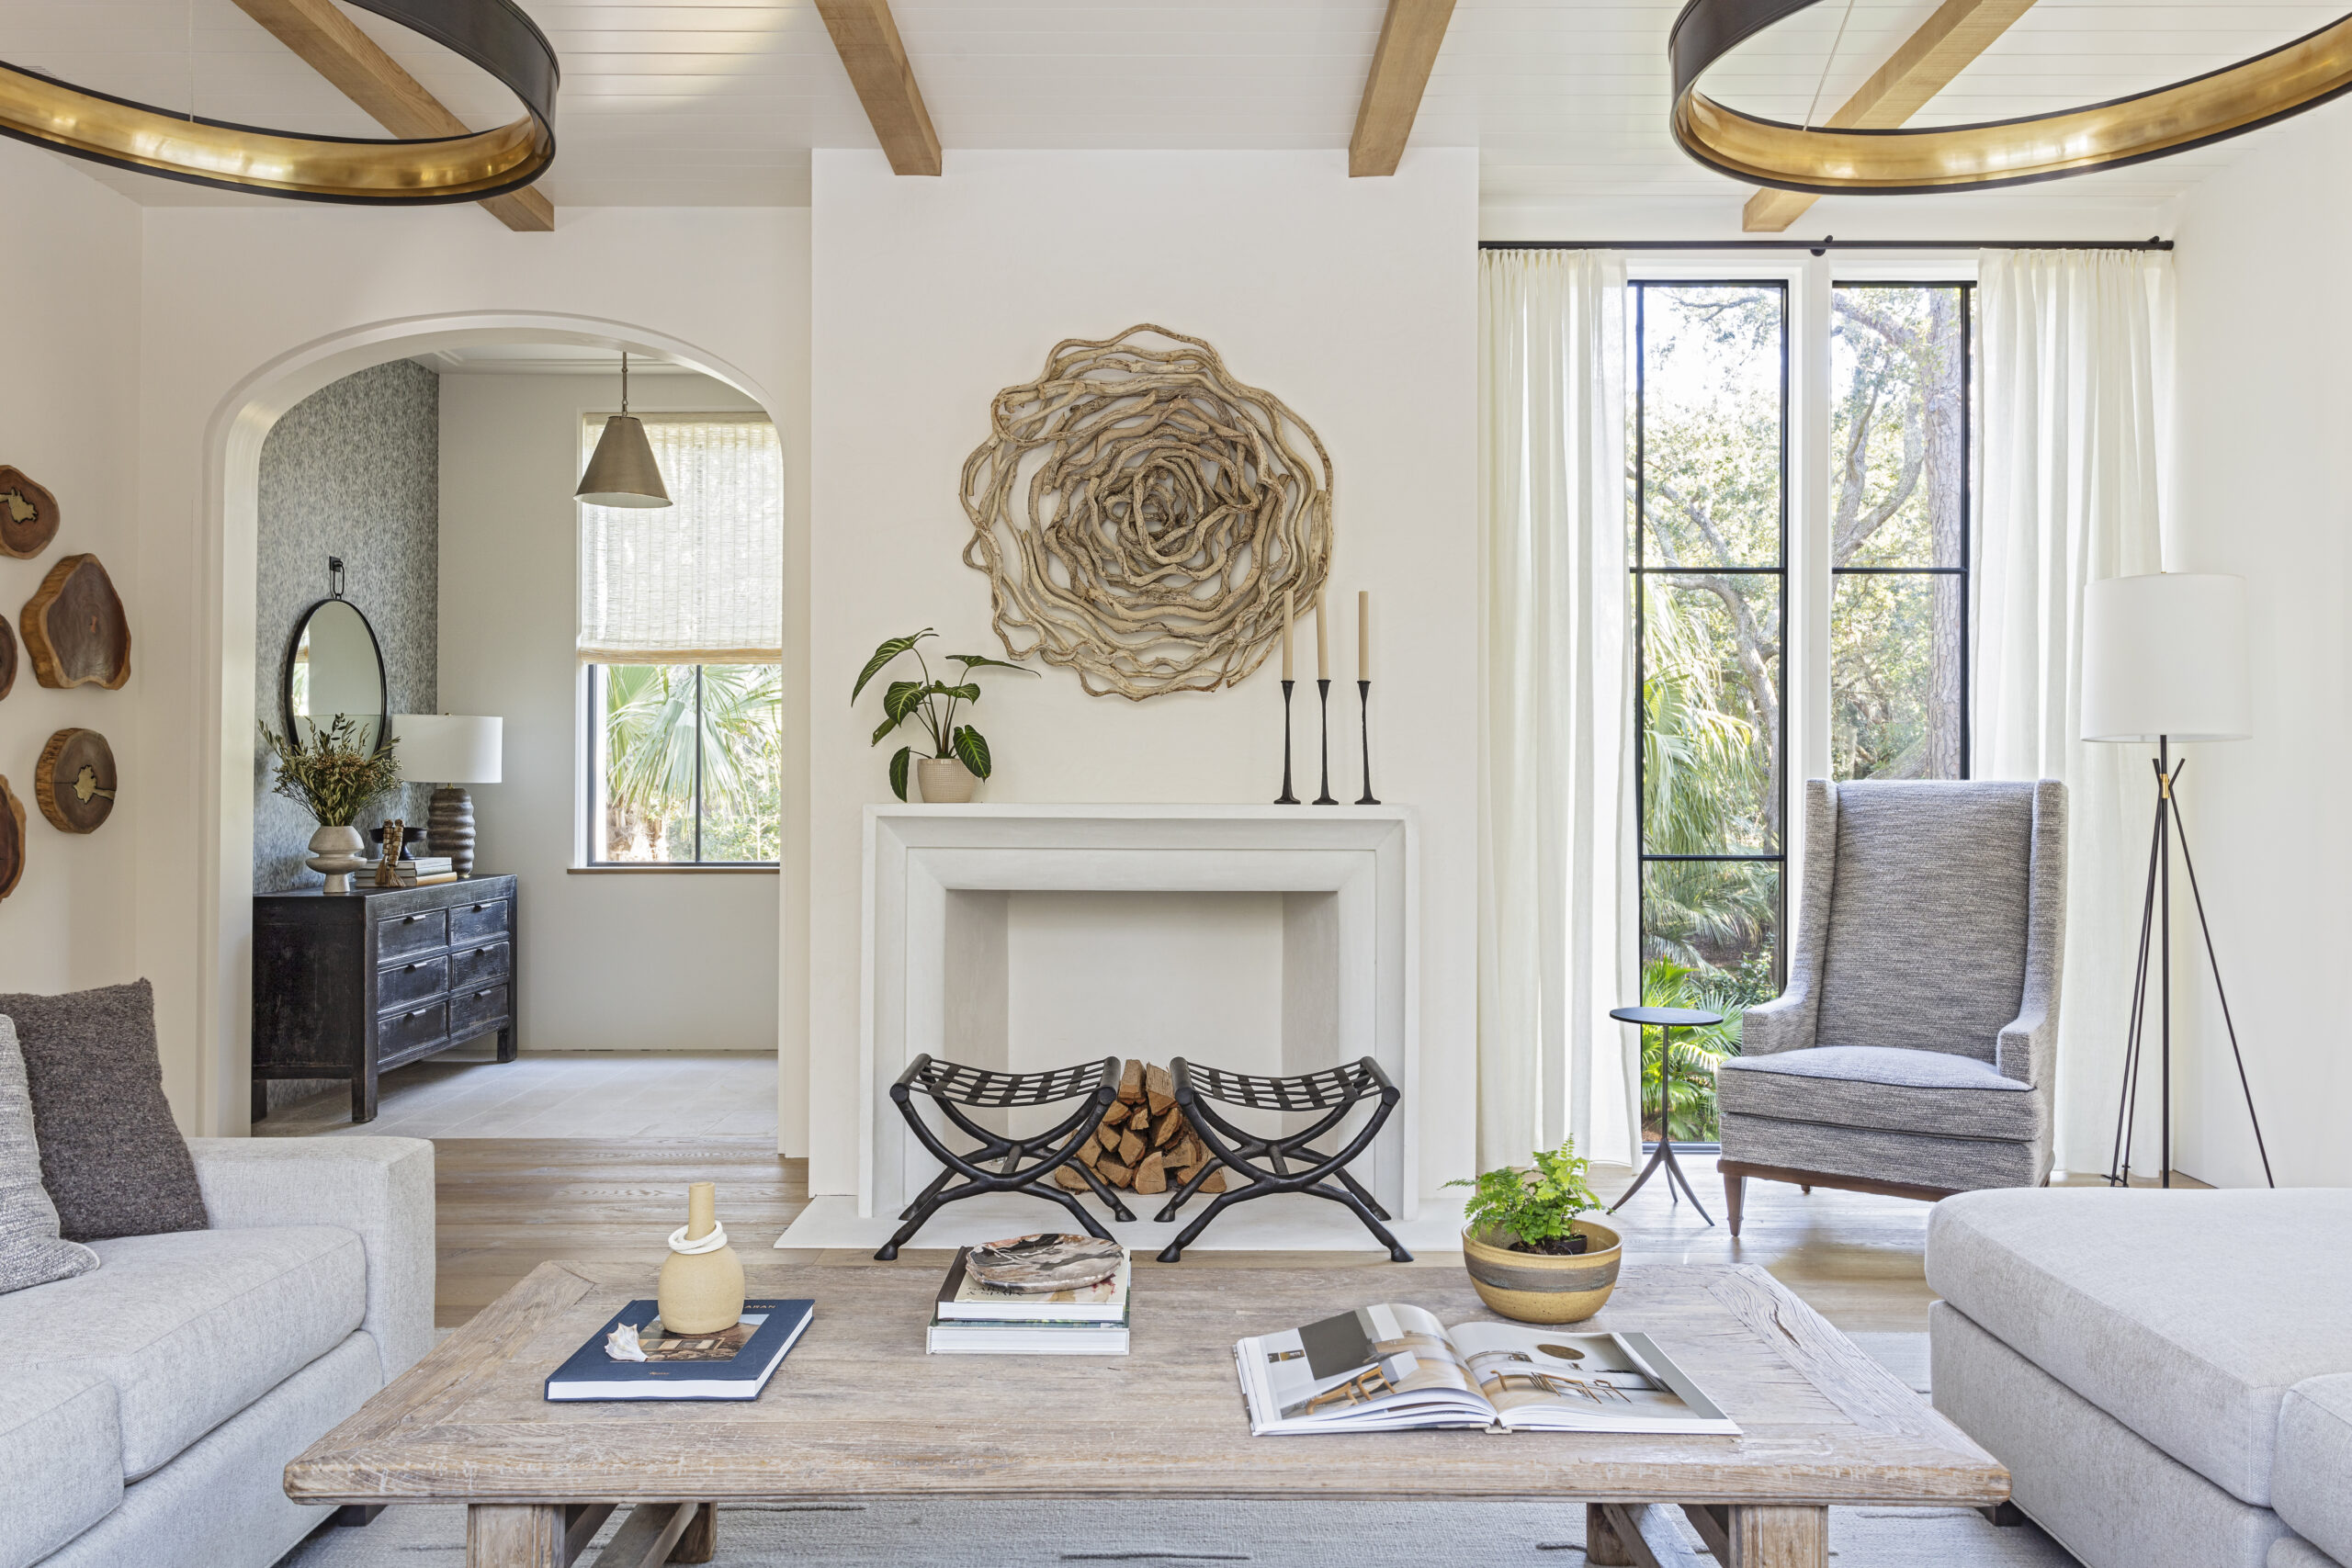 Home tour featuring living room designed by Margaret Donaldson